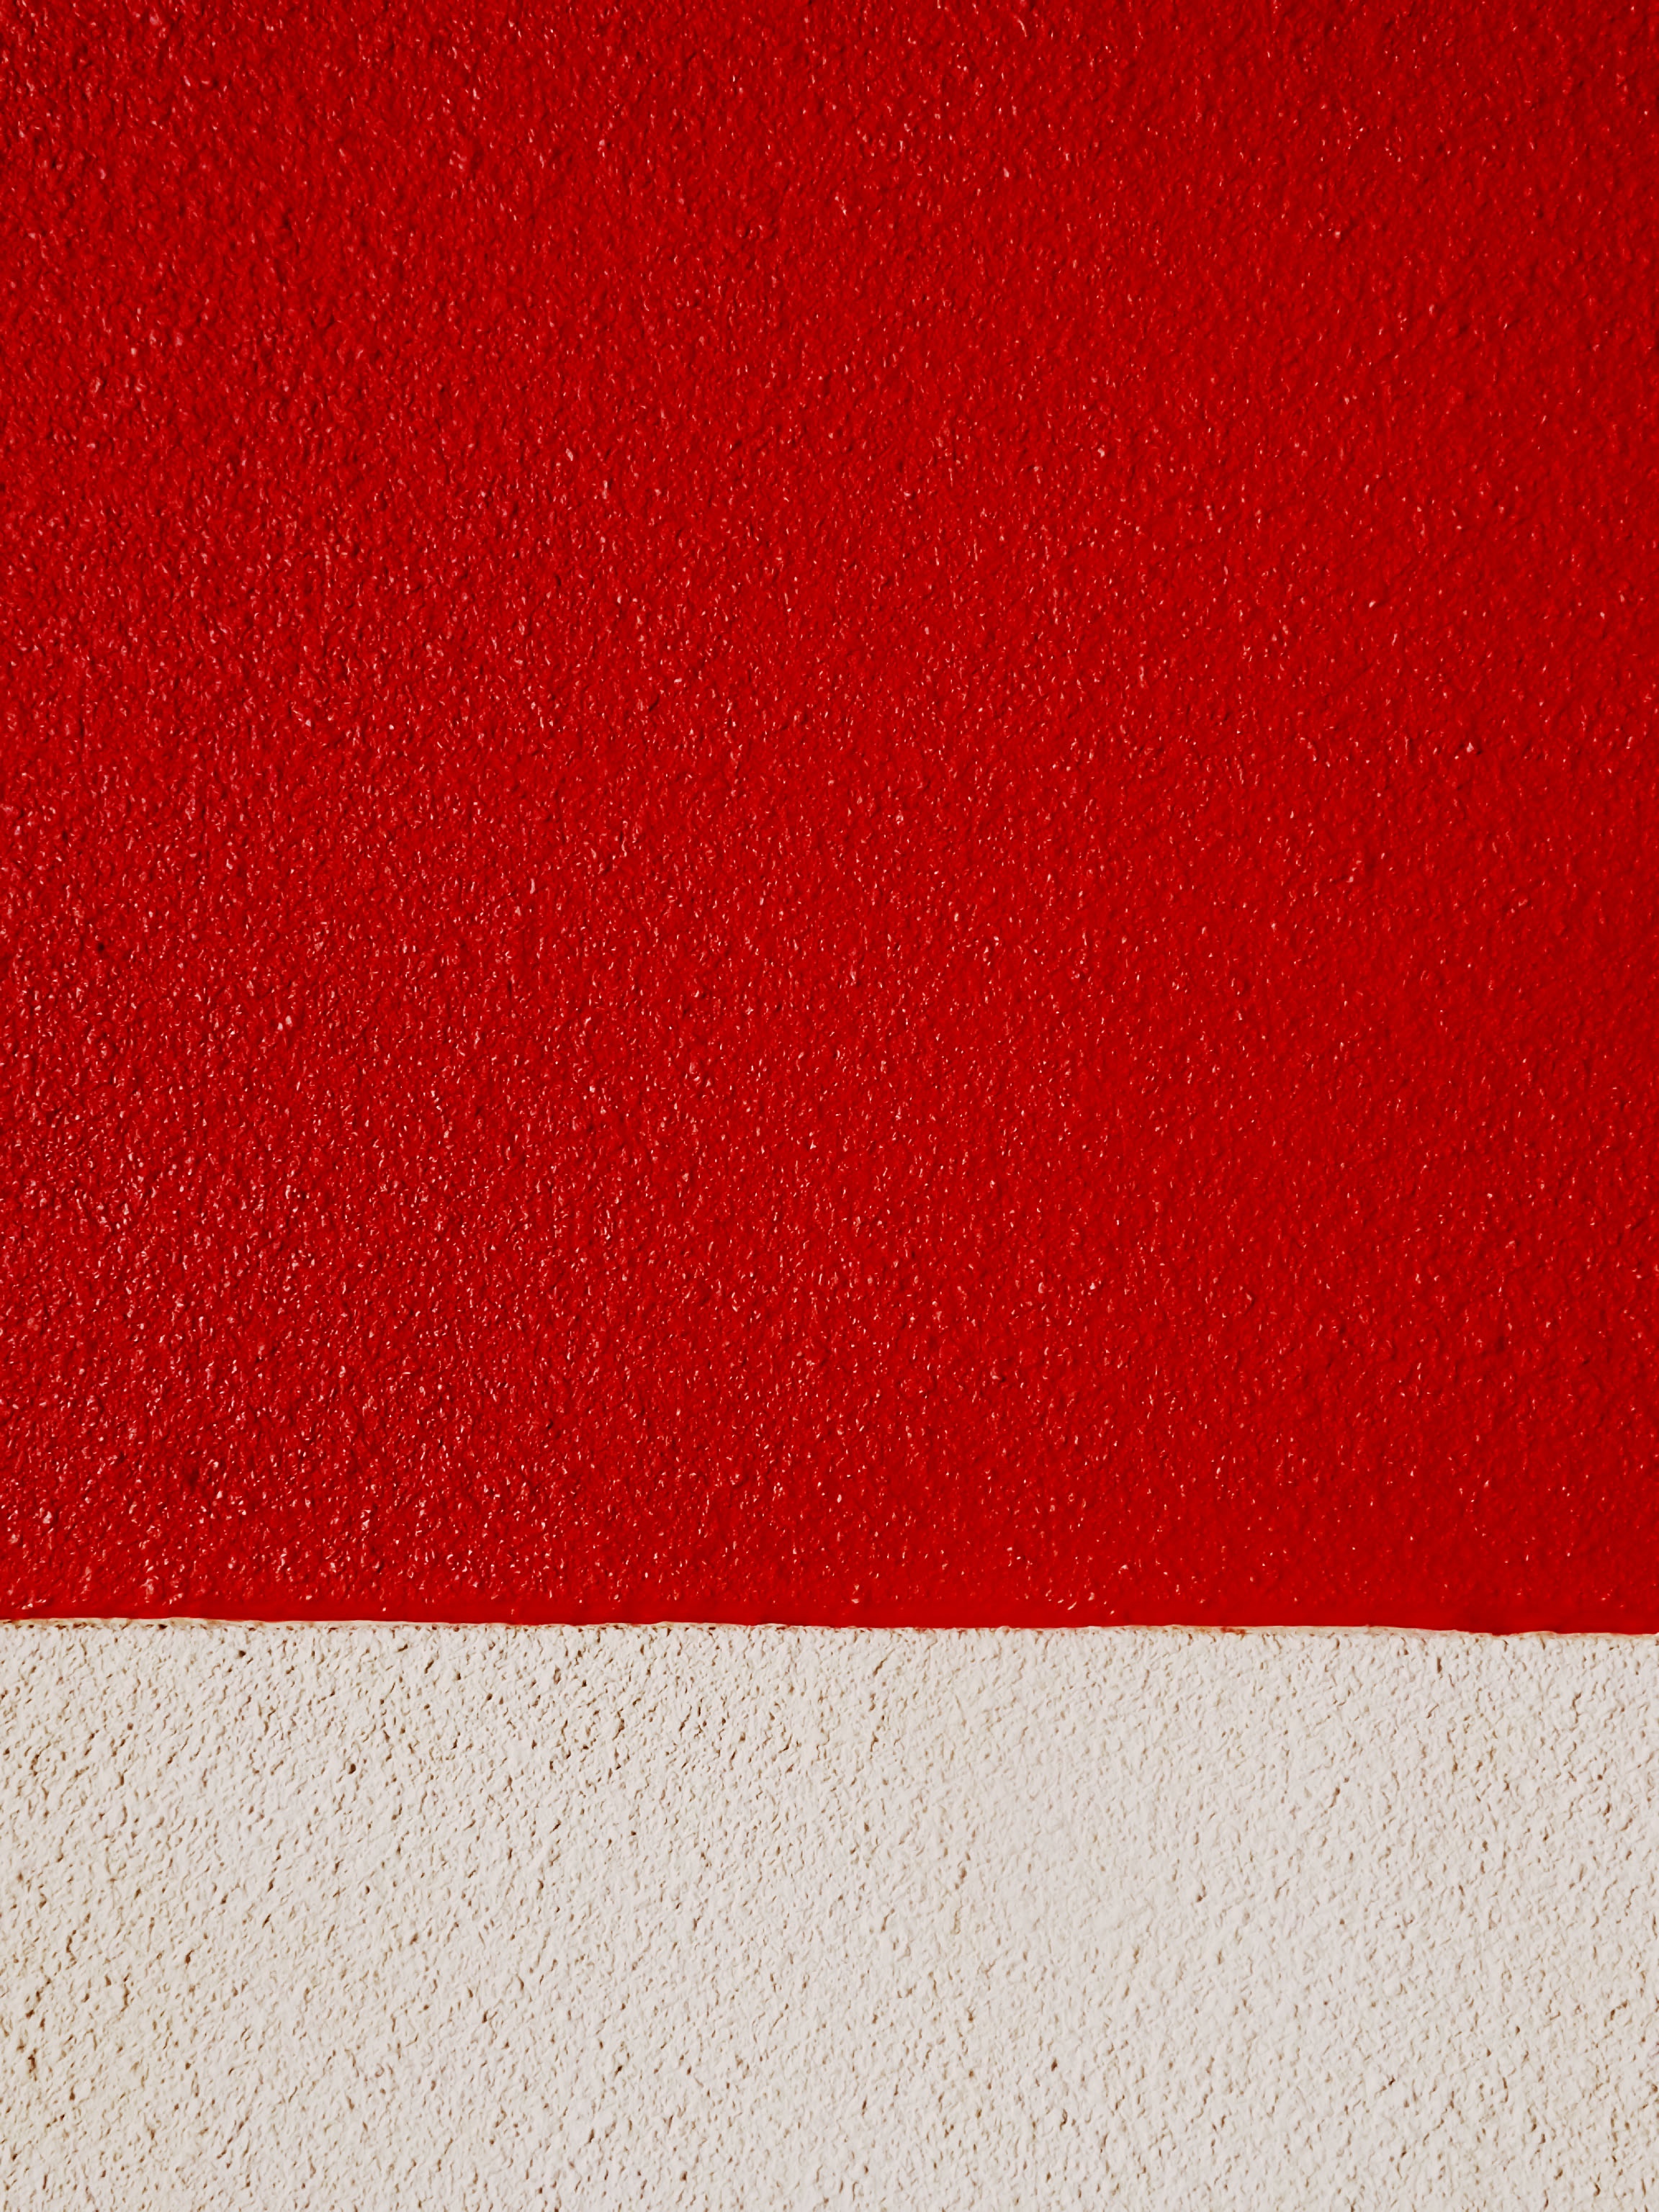 texture, paint, red, textures, wall, rough 1080p